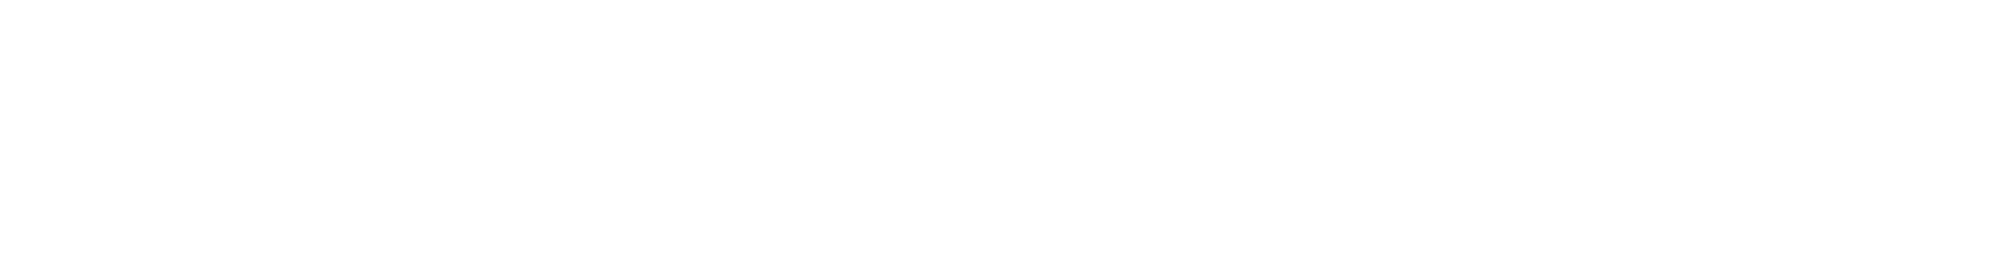 Table comparing machine translation systems with models, vendors, and metrics like Spanish benchmarks and cross-language rera